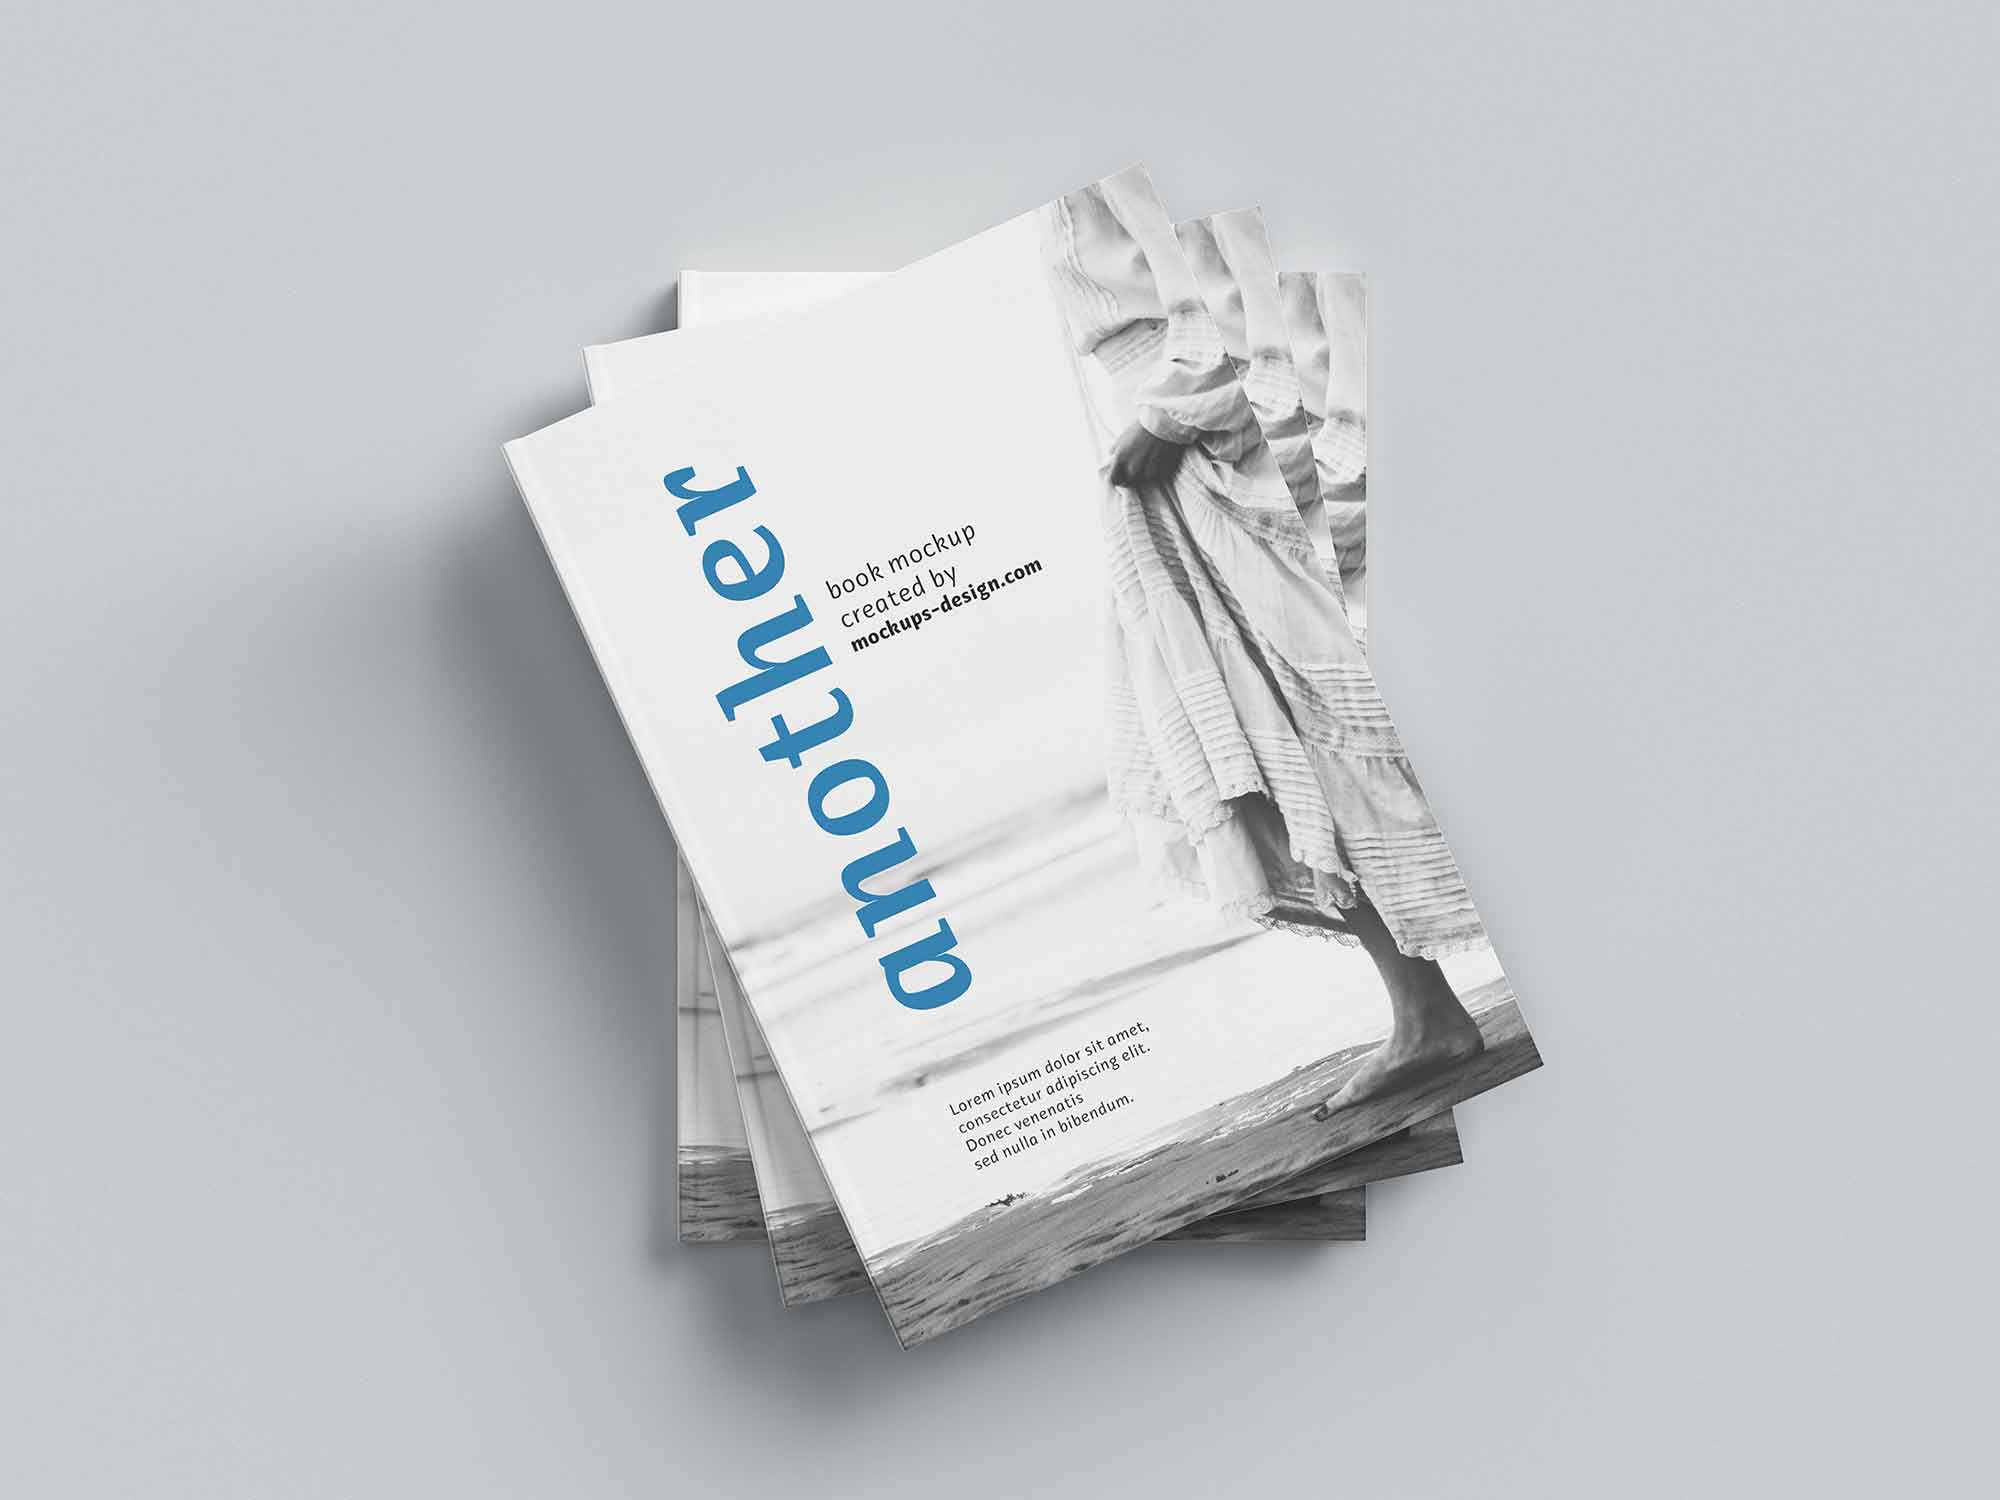 A stack of modern magazines with a minimalist cover design featuring the word "another" in lowercase, set against a backdrop of a monochrome, abstract image, resembling a thin book mockup.